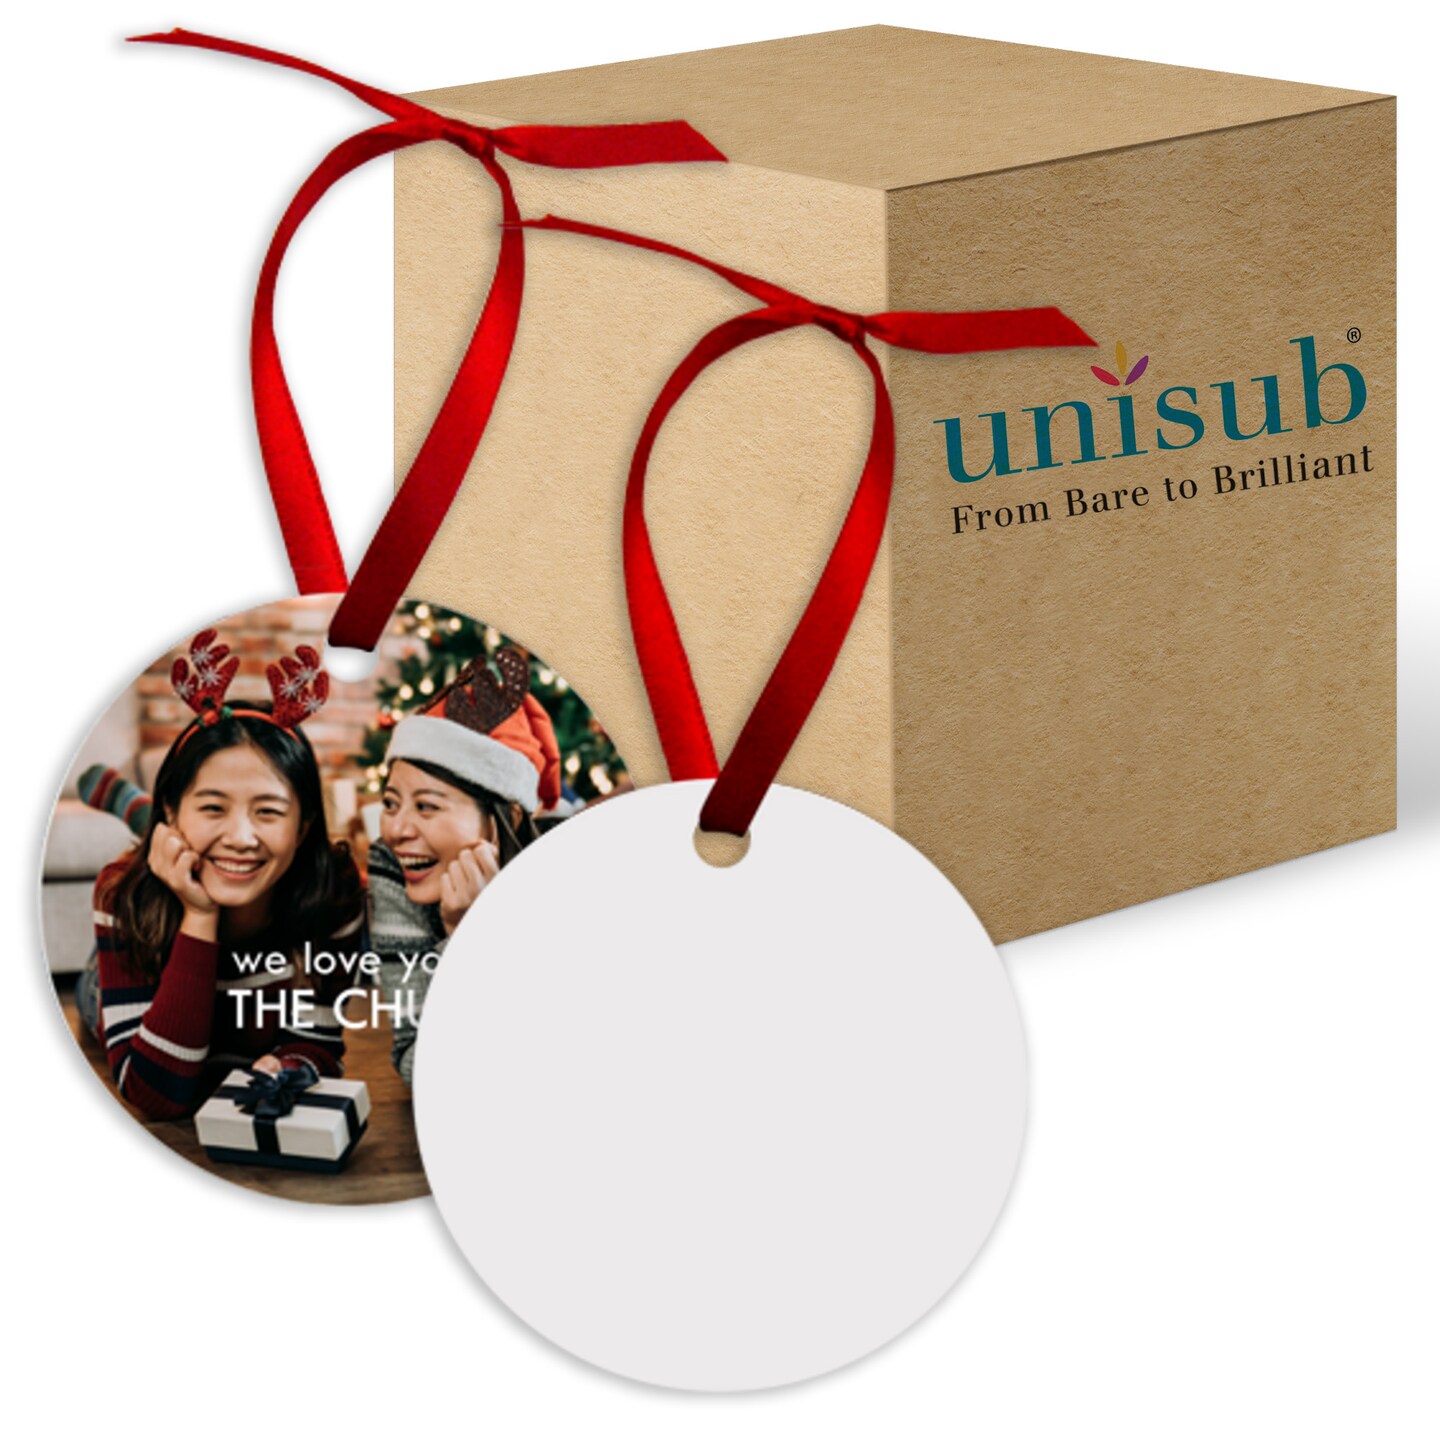 Unisub Round Sublimation Ornaments With White Ribbons White Gloss Coating  For Heat Press Personalized Christmas Sublimation Ornament Blanks For -  2.75 Metallic 1-Sided